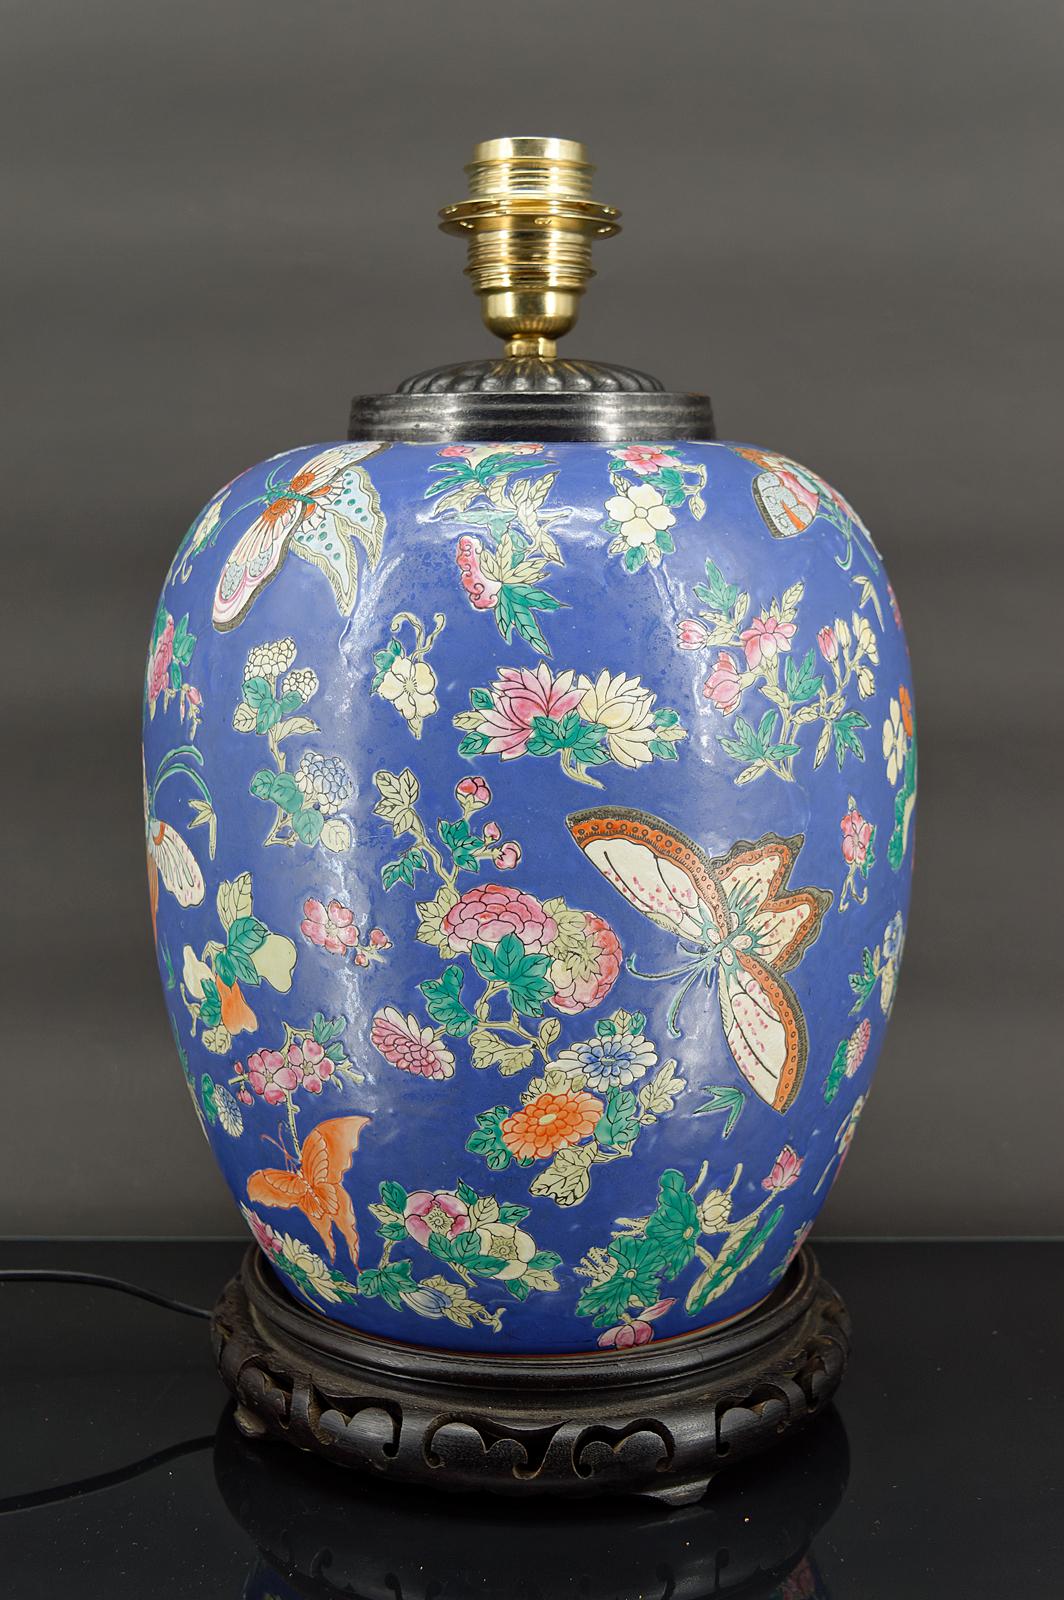 Important Chinese lamp in blue ceramic decorated with butterflies and flowers.
China.
QING dynasty, Tongzhi era, 1861-1875

Blackened wooden base
In excellent condition, electricity OK.

Dimensions:
height 44 cm
diameter 25 cm